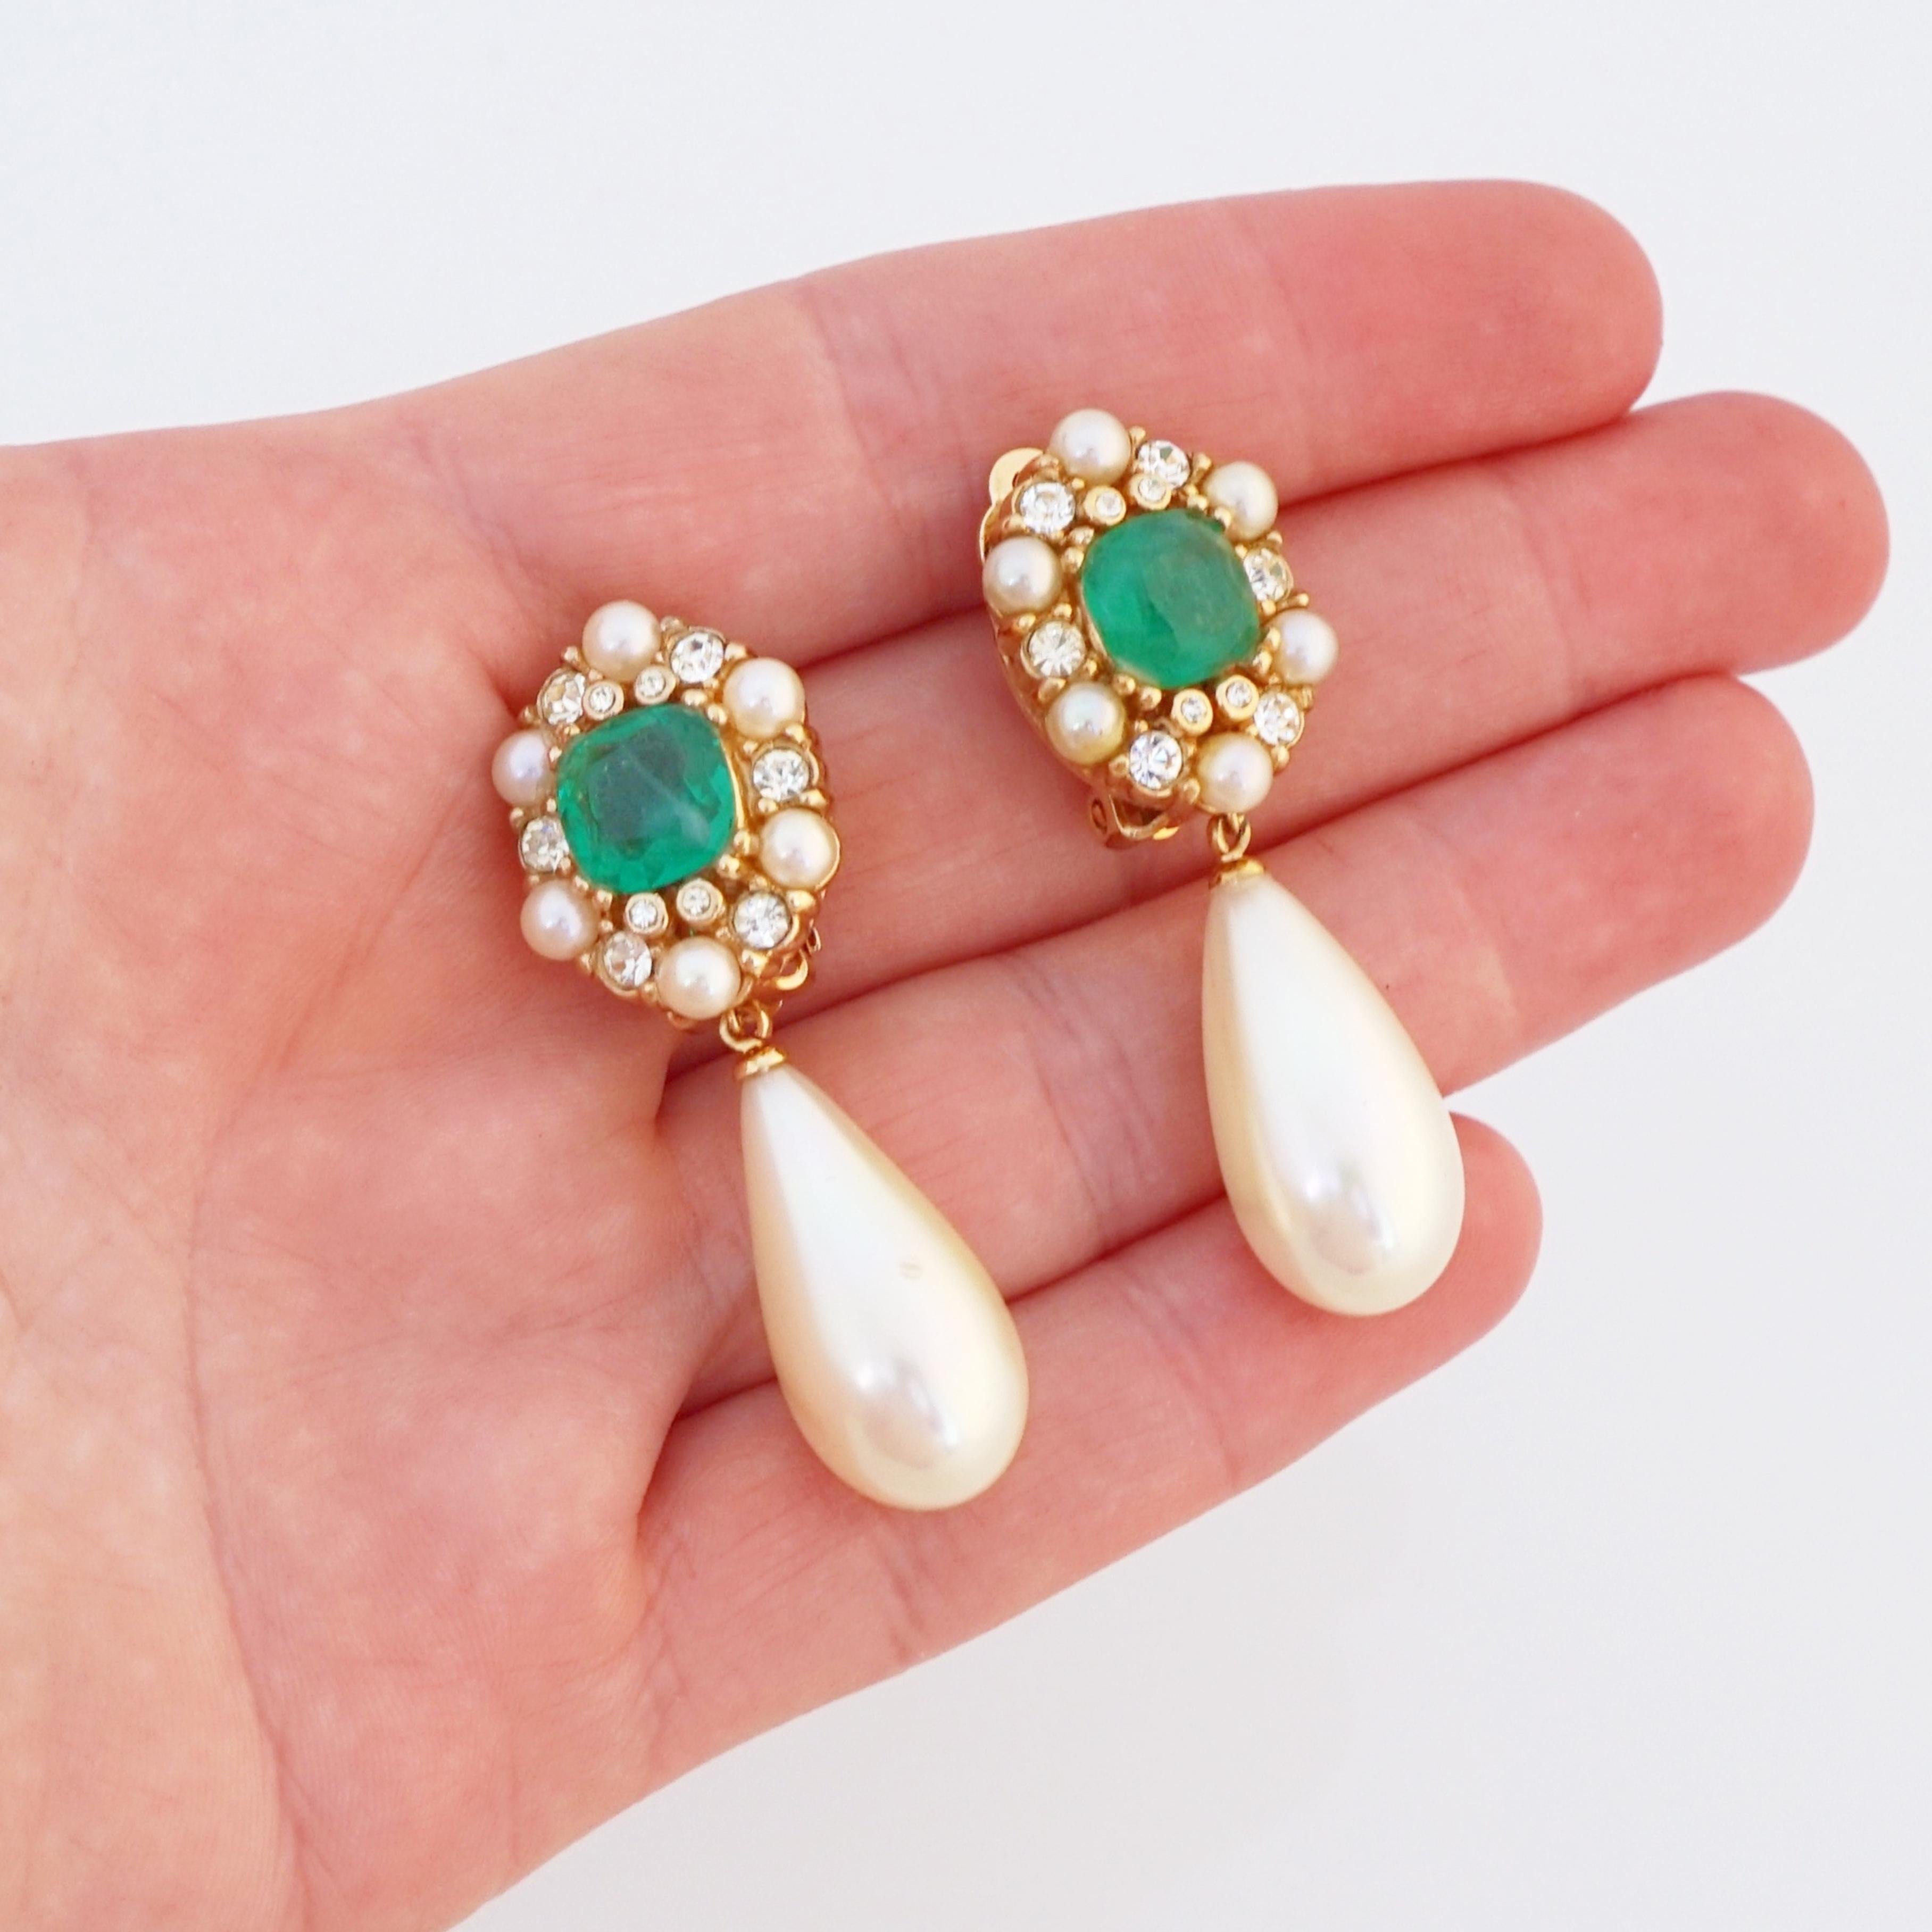 Women's Flawed Emerald Art Glass With Crystal & Pearl Halo Drop Earrings By Ciner, 1960s